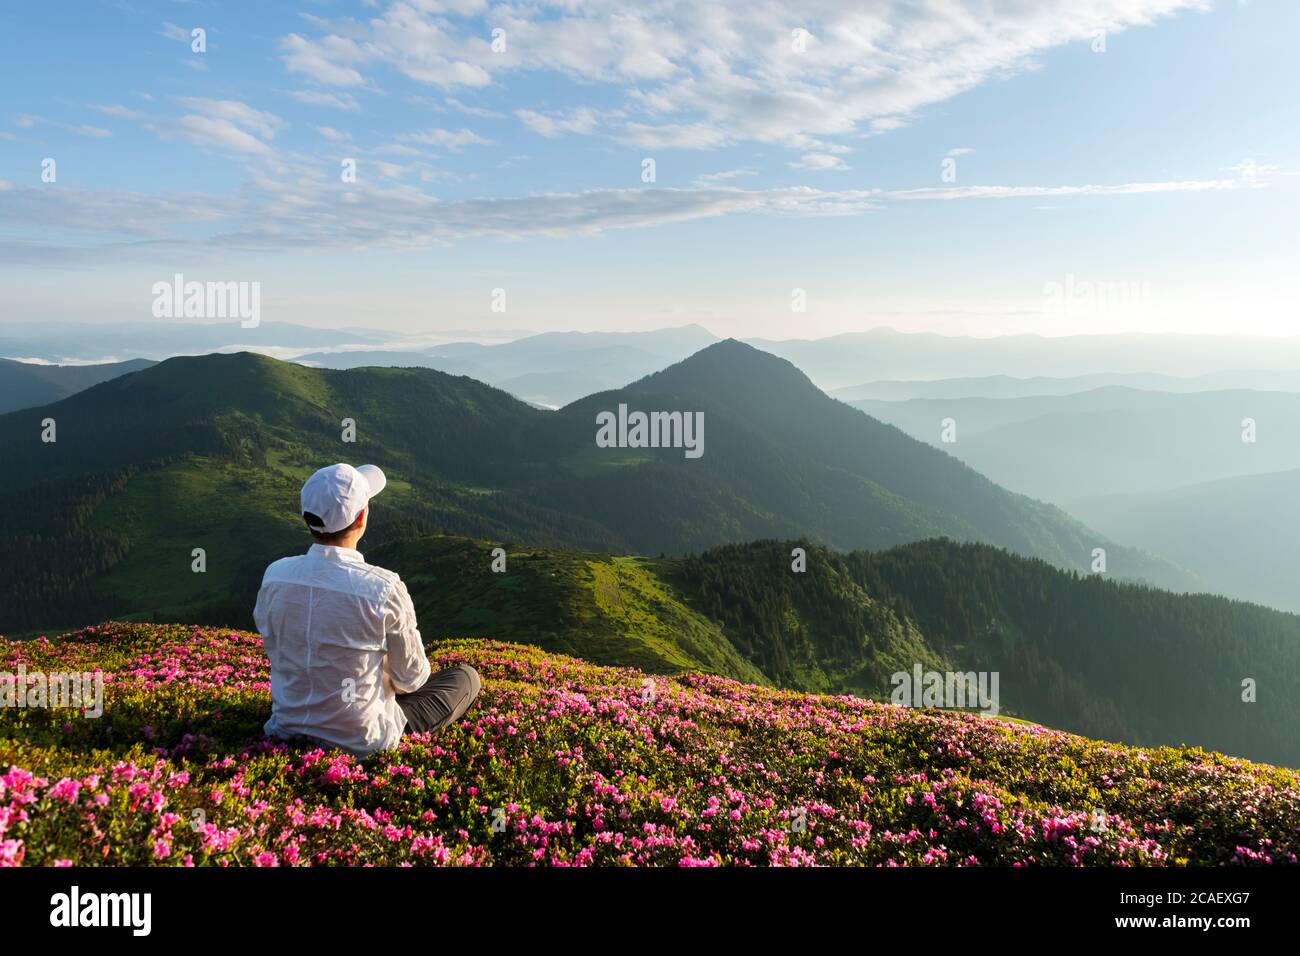 A tourist in white clothes sits on a pink carpet of rhododendron flowers that cover a mountain meadow in summer. Carpathian mountains, Europe. Landscape photography Stock Photo